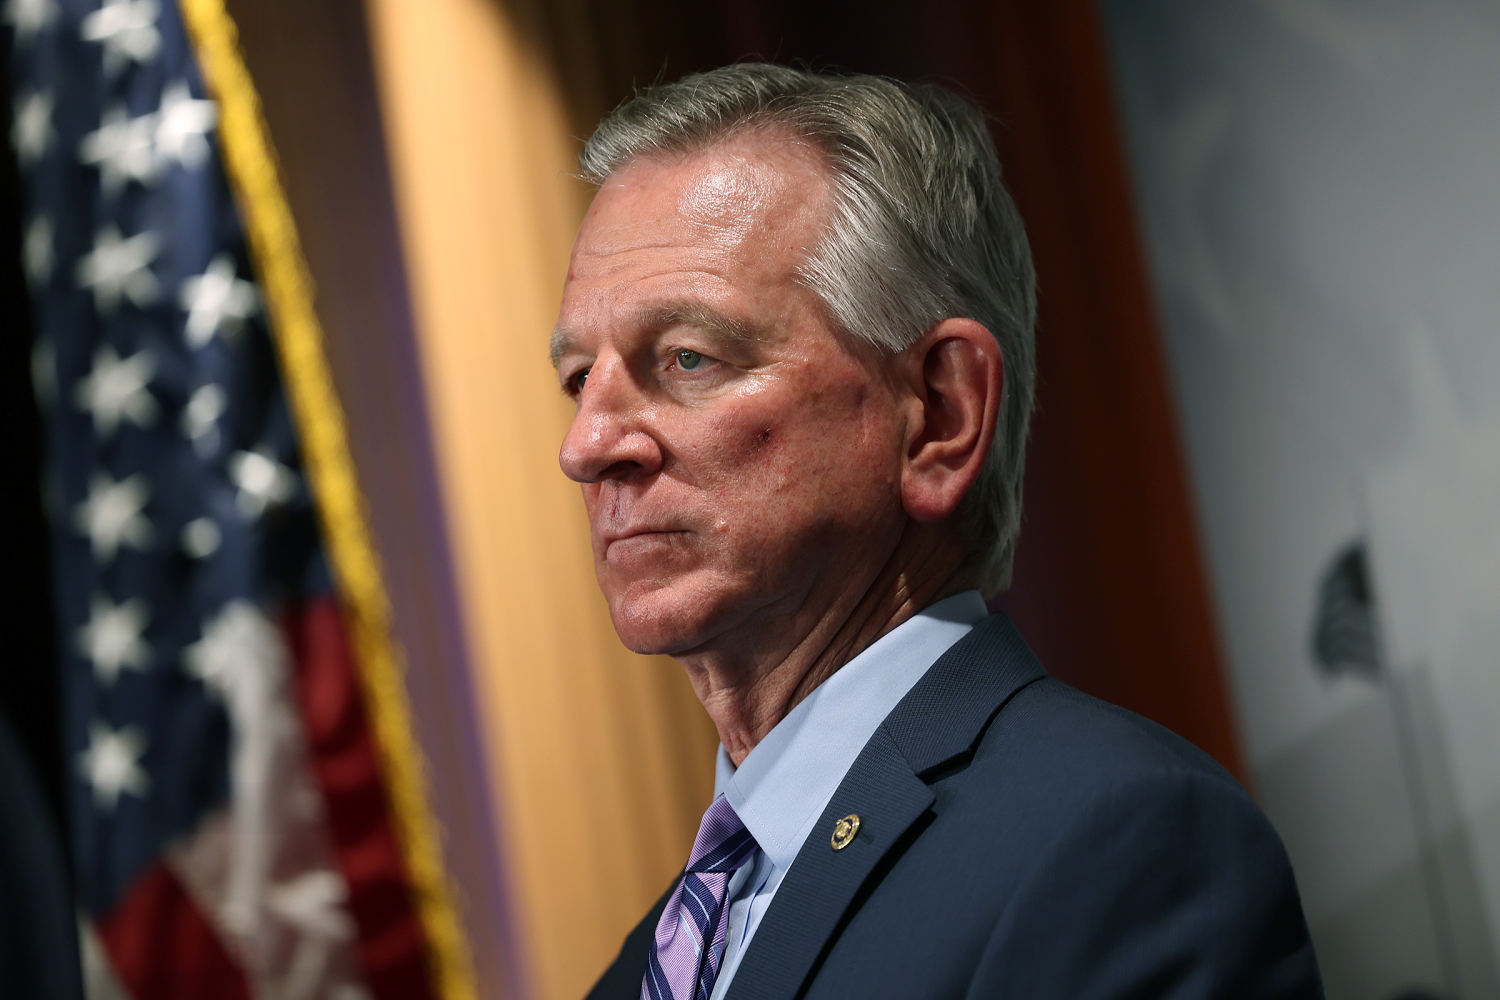 Tommy Tuberville's comment about Biden marks a new low for the Senate